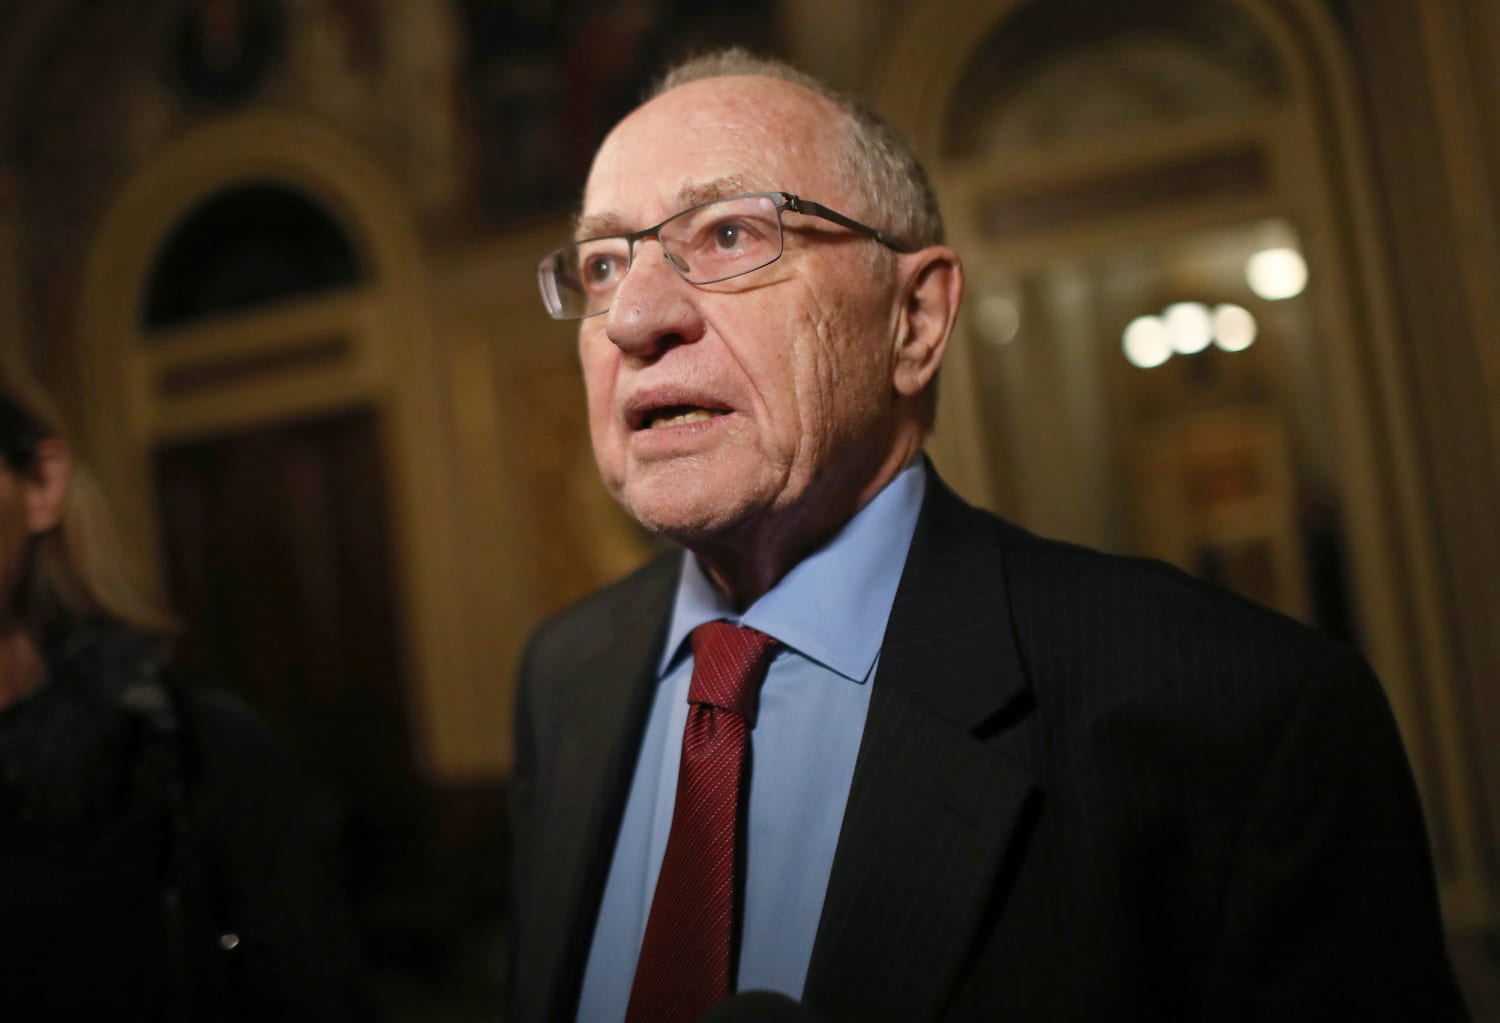 Dershowitz defended Trump on First Amendment grounds. The Dobbs leak is different.